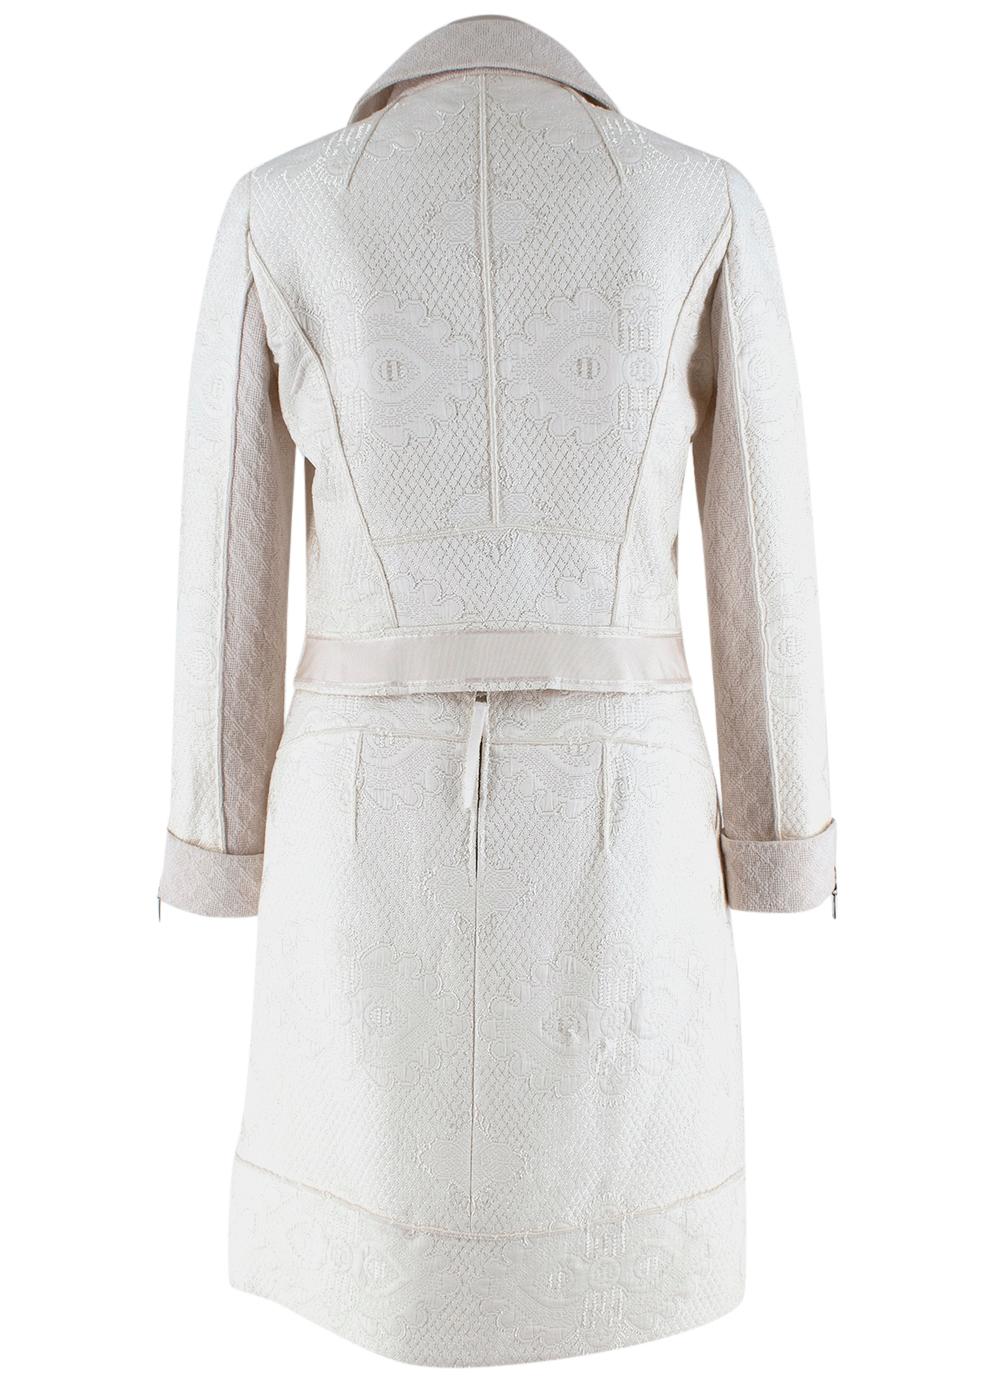 Gray Louis Vuitton Cream Embroidered Jacquard Jacket & Skirt - Size US 0-2